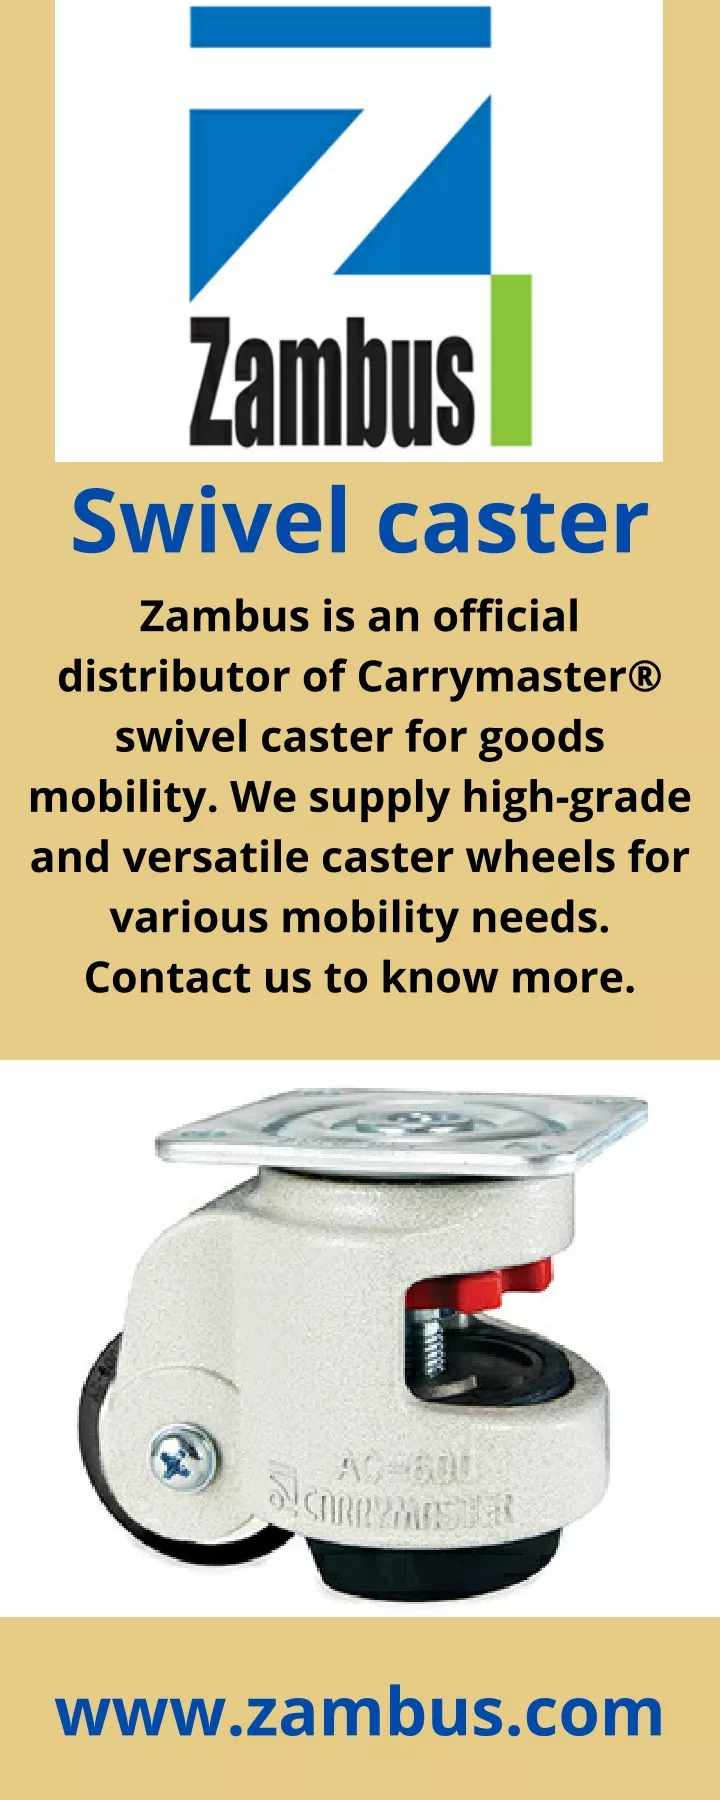 swivel caster zambus is an official distributor